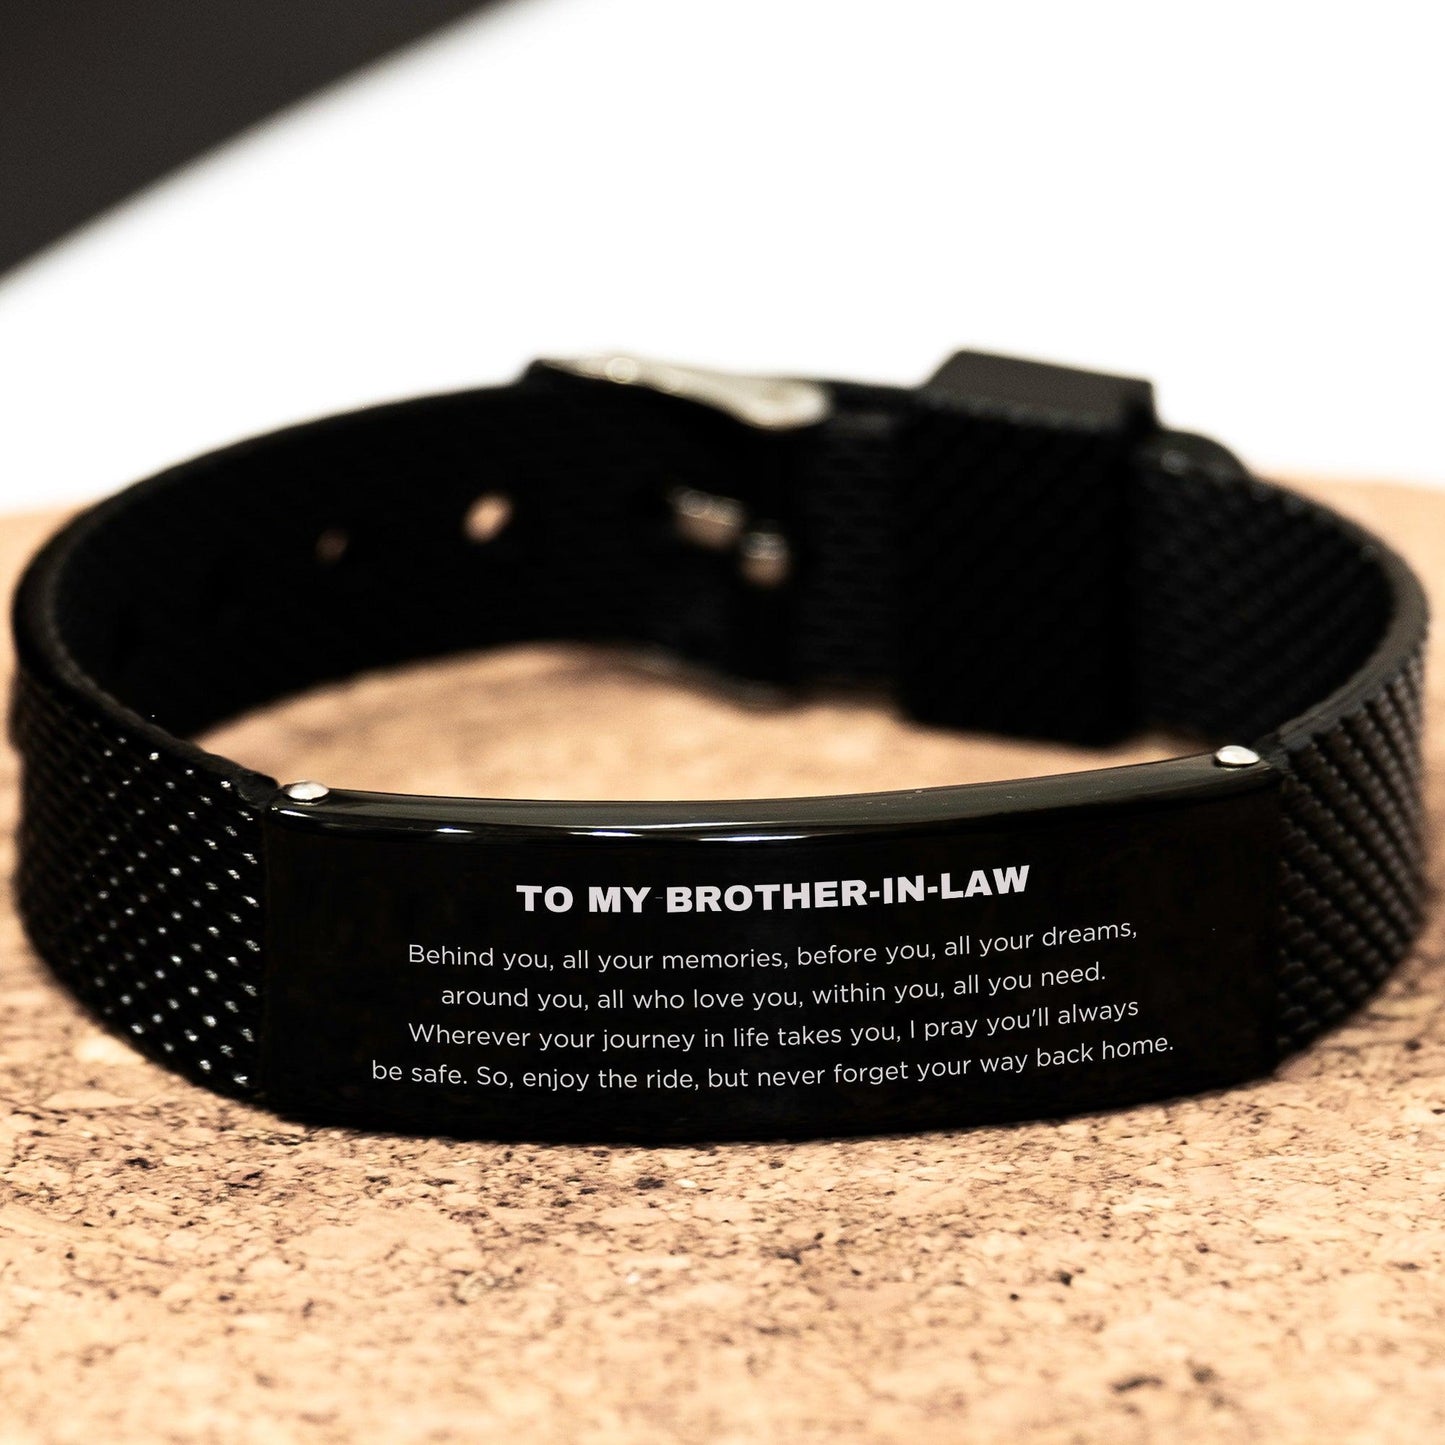 To My Brother In Law Gifts, Inspirational Brother In Law Black Shark Mesh Bracelet, Sentimental Birthday Christmas Unique Gifts For Brother In Law Behind you, all your memories, before you, all your dreams, around you, all who love you, within you, all yo - Mallard Moon Gift Shop